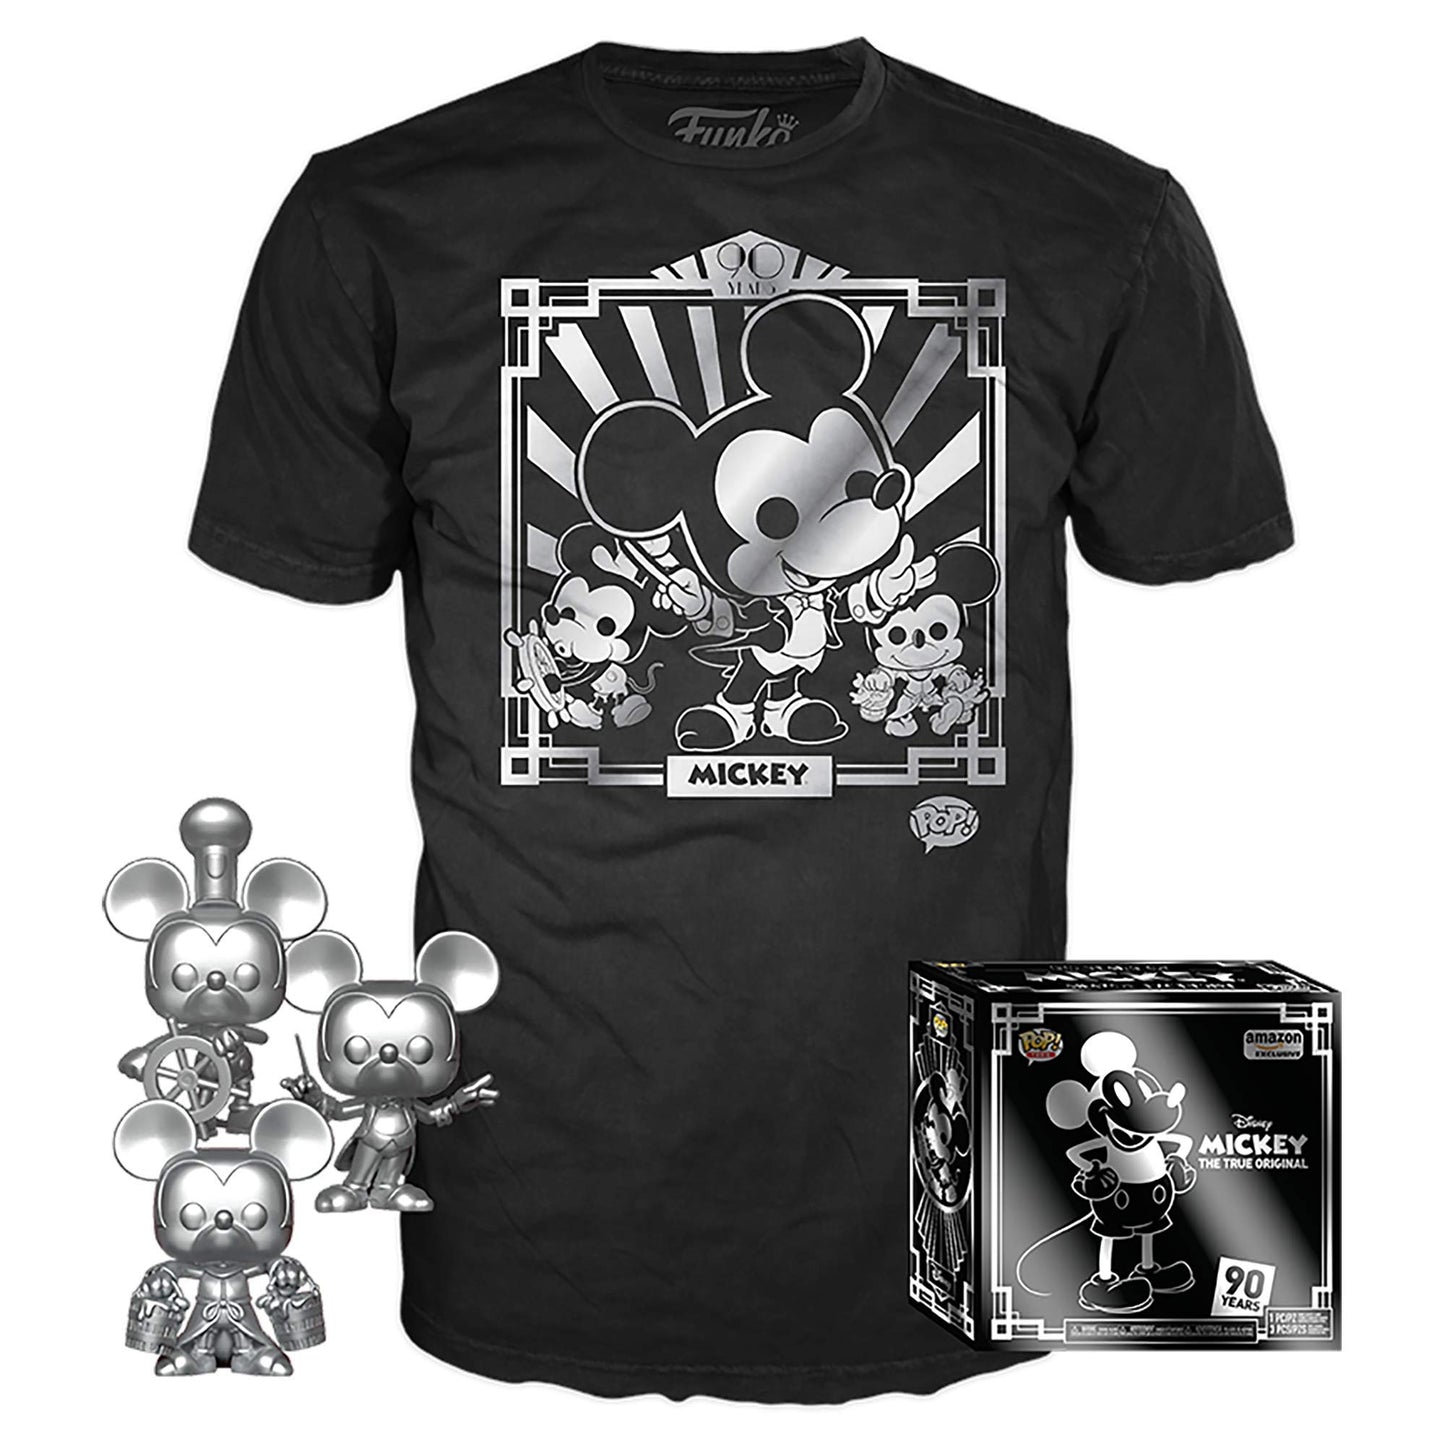 Funko POP! 3 Pack & Tee Disney - Mickey's 90th T-Shirt and Silver Steamboat Willie, Conductor, and Apprentice, Amazon Exclusive, Size XL